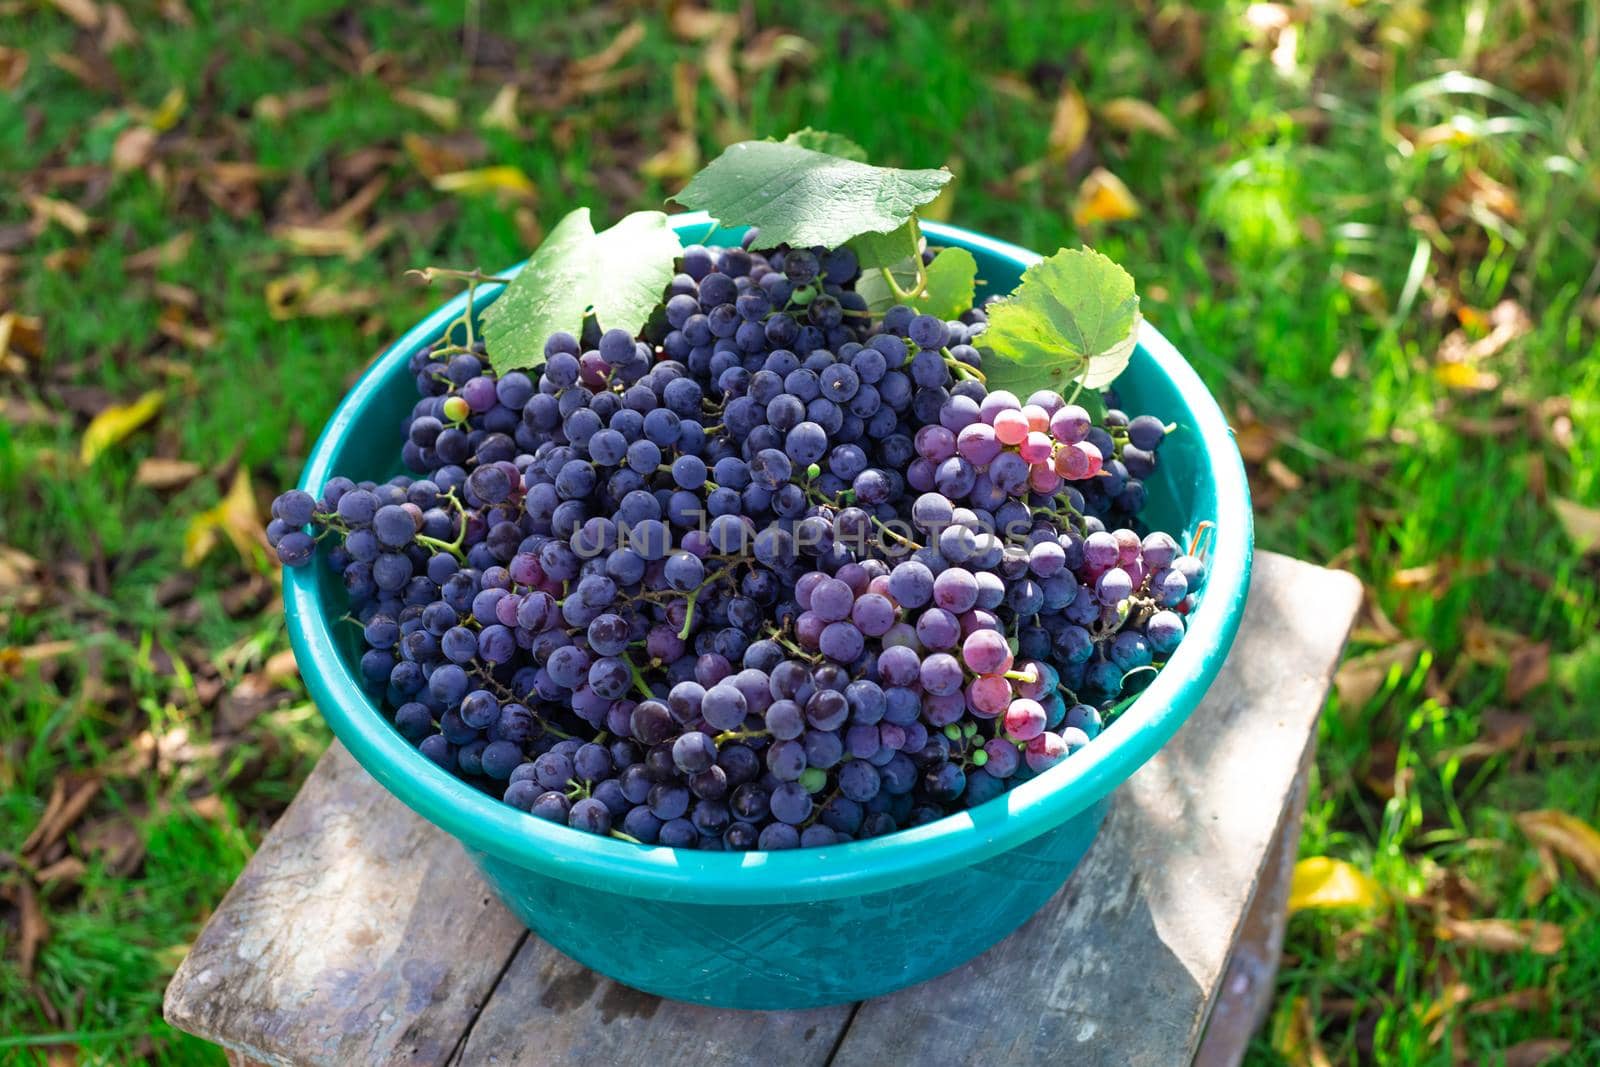 A full basket of ripe black grapes. Harvesting fruits in autumn at the farm.